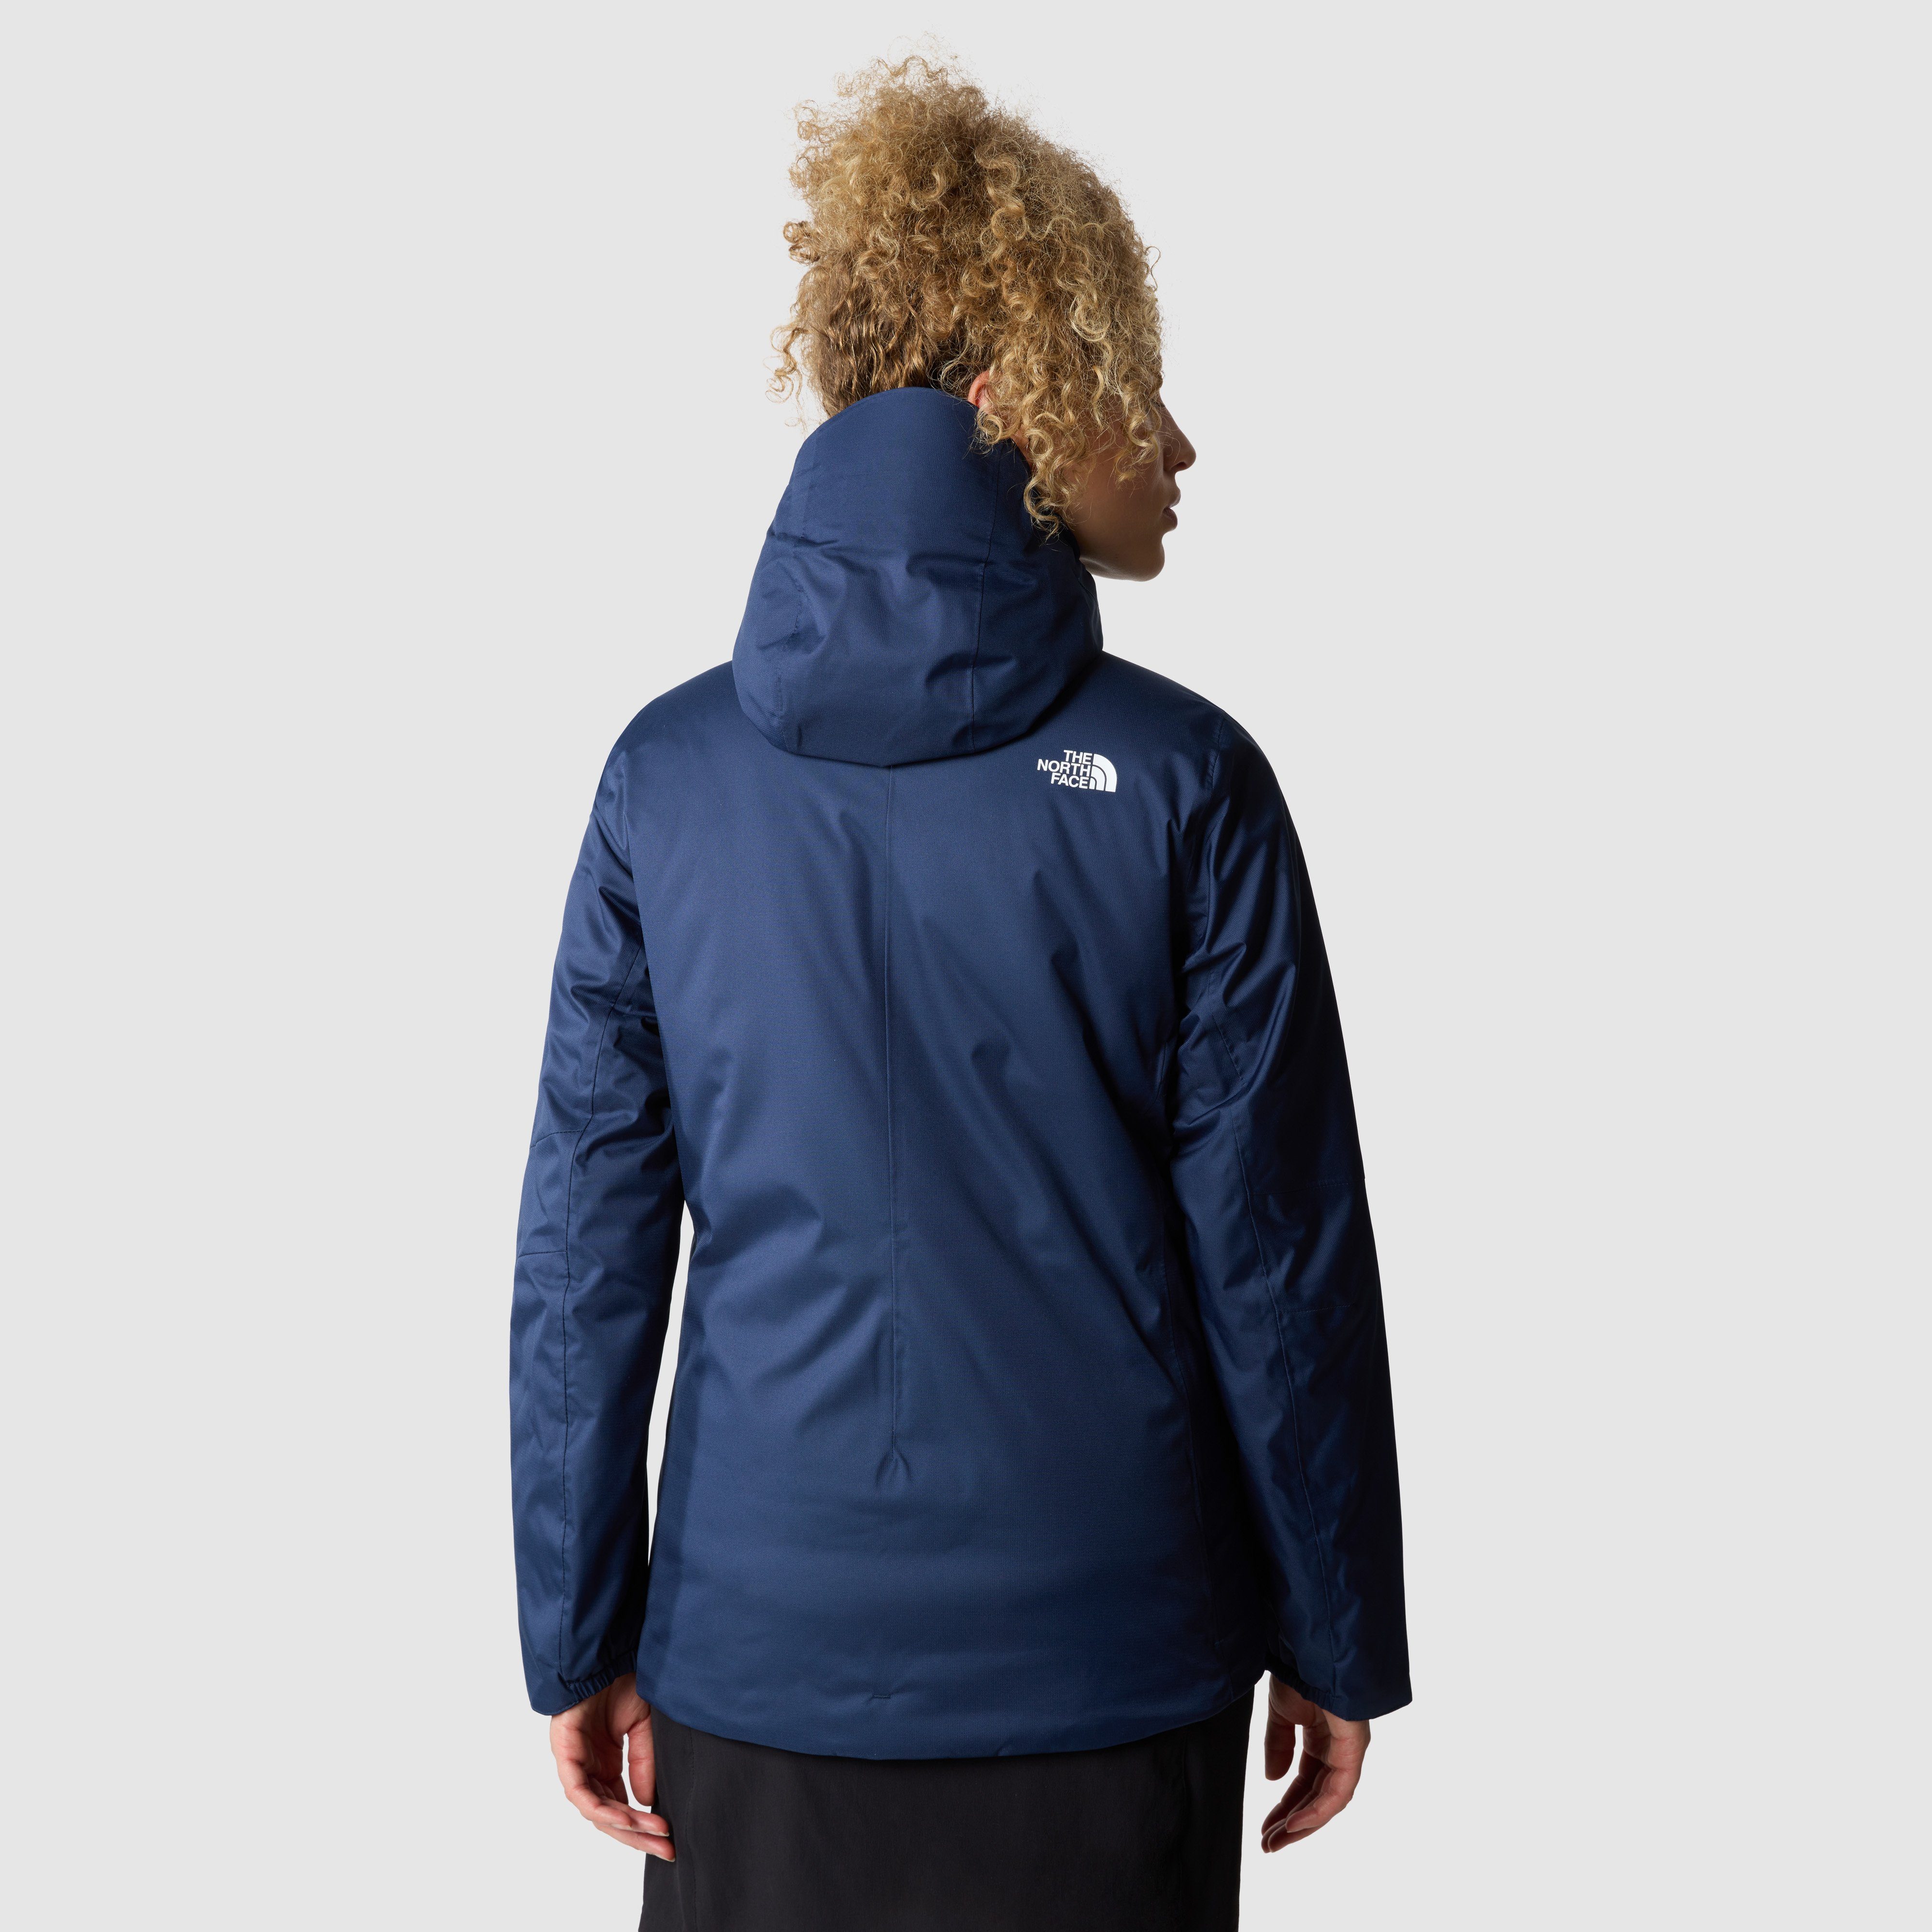 JACKET QUEST Face Logodruck W INSULATED Funktionsjacke The mit North